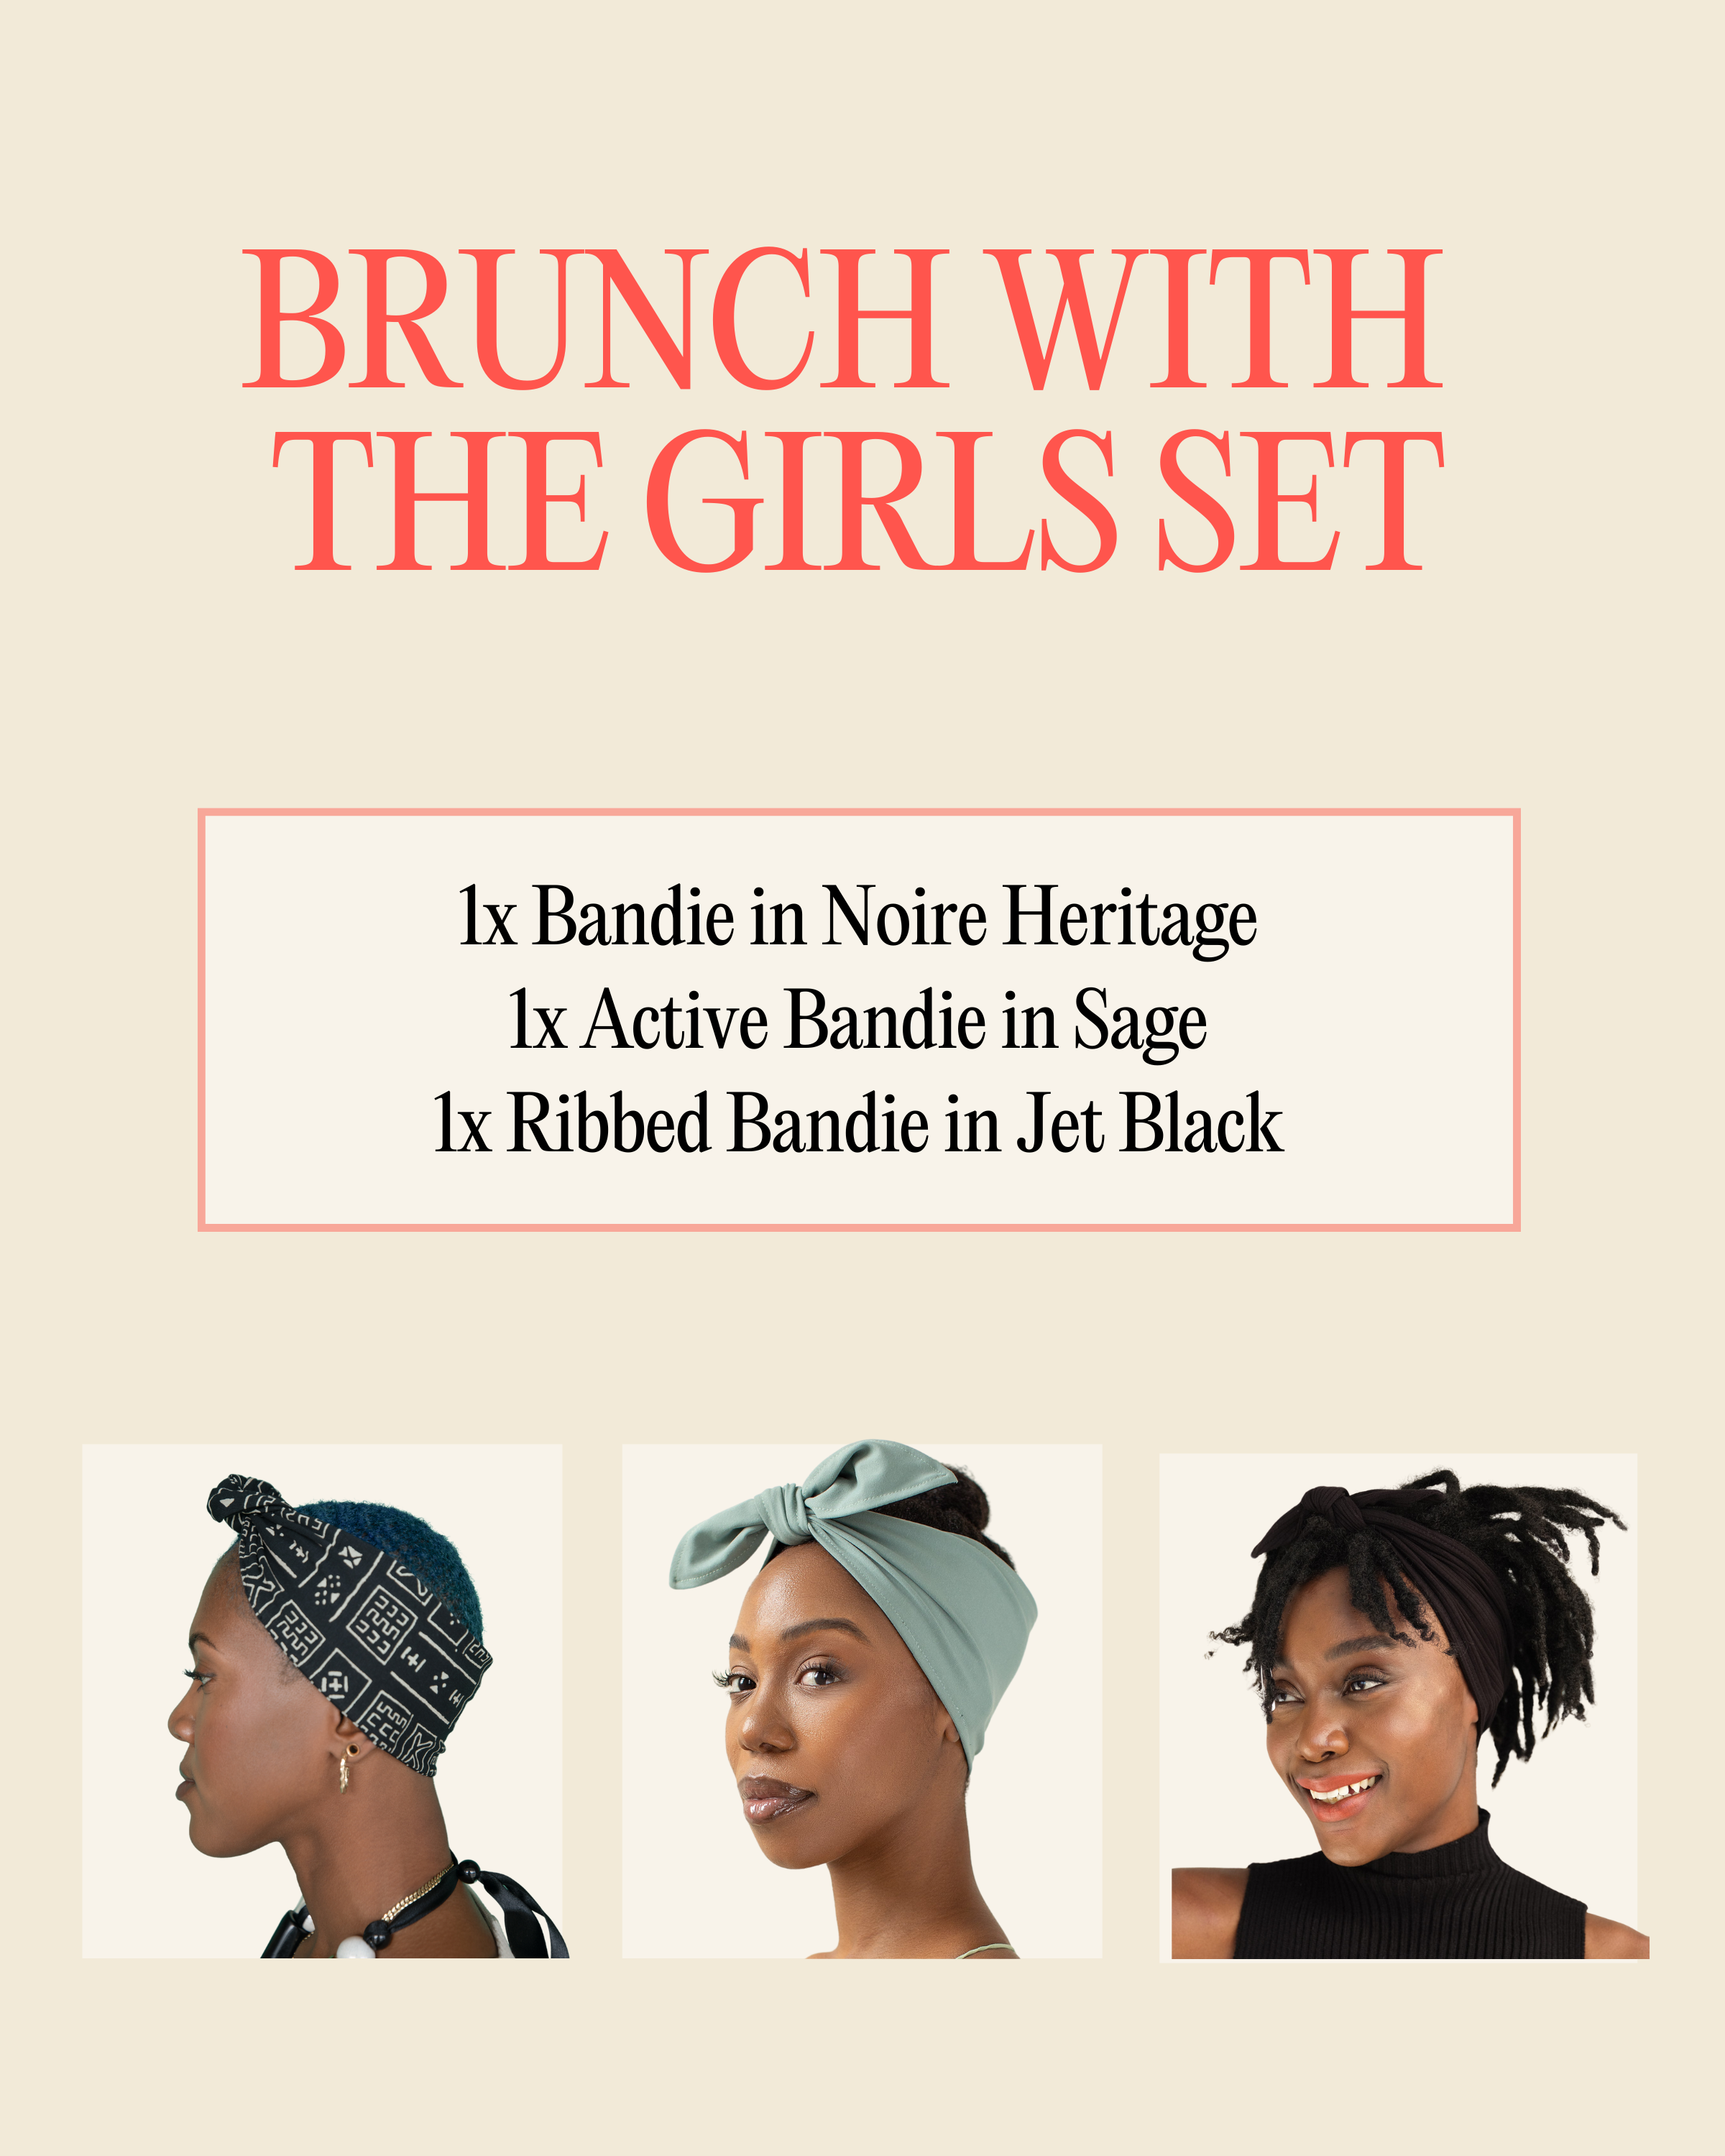 Brunch with The Girls Set